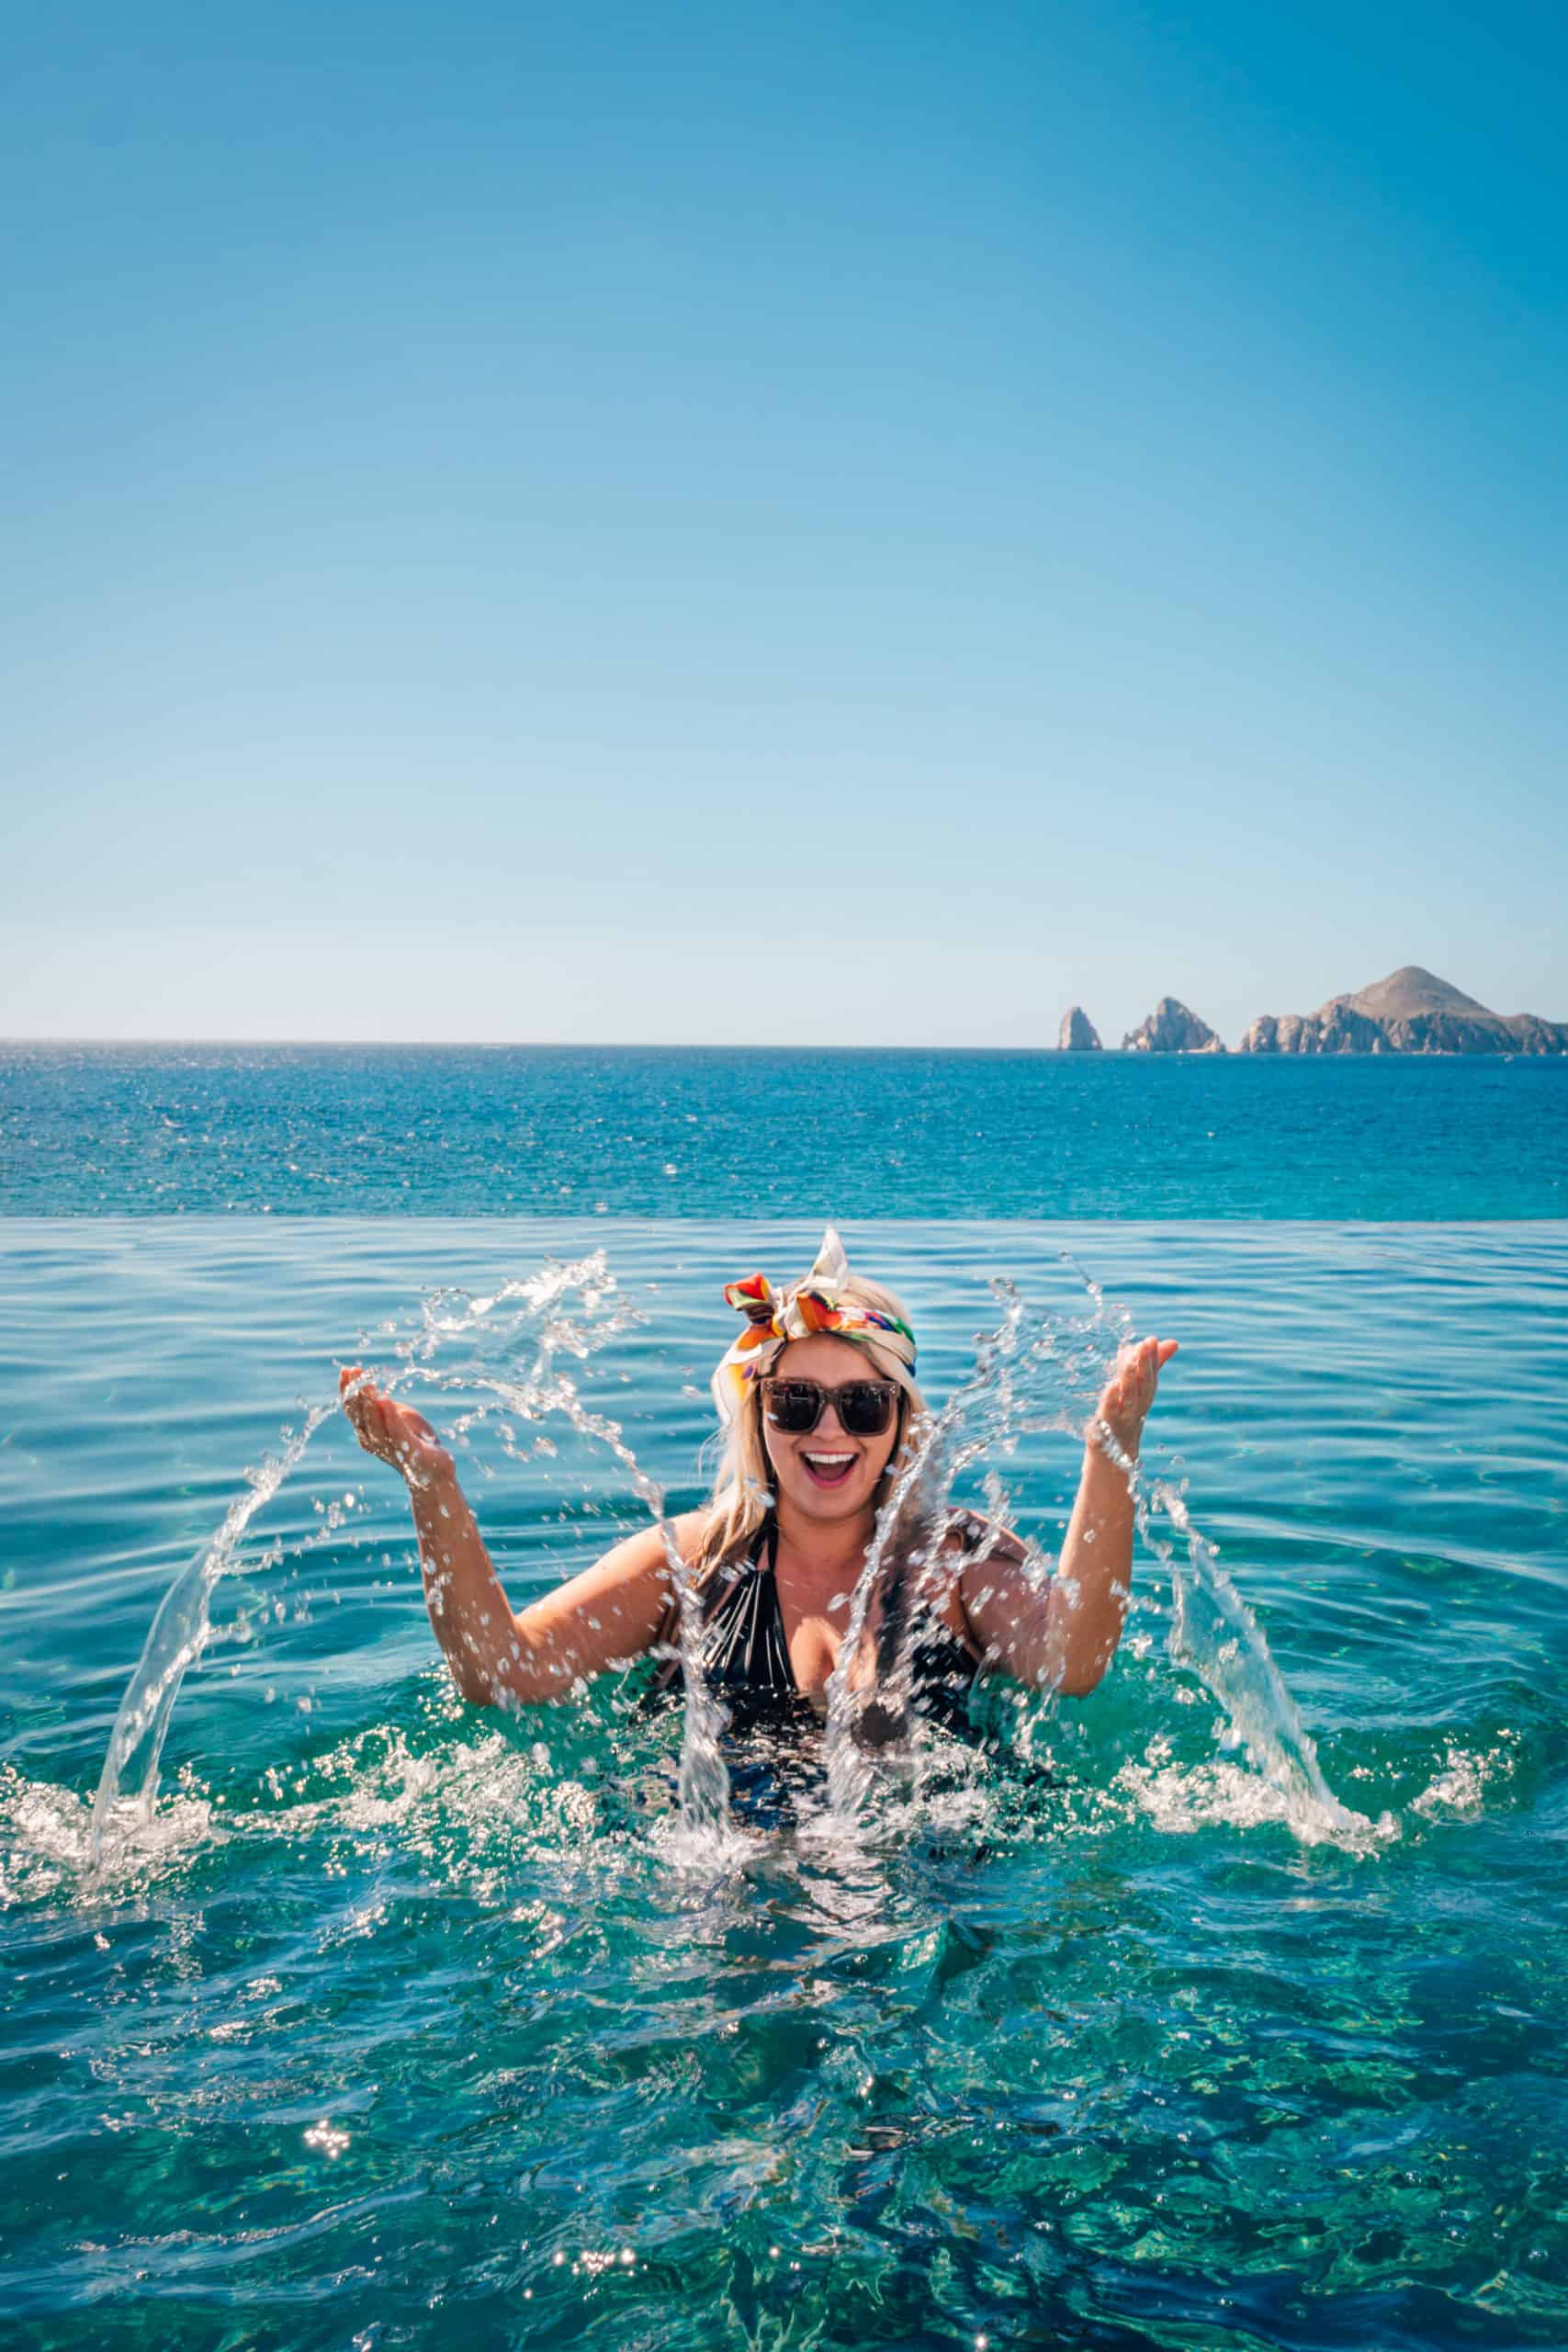 Splashing around at the Cape Thompson pool in Cabo San Lucas, Mexico